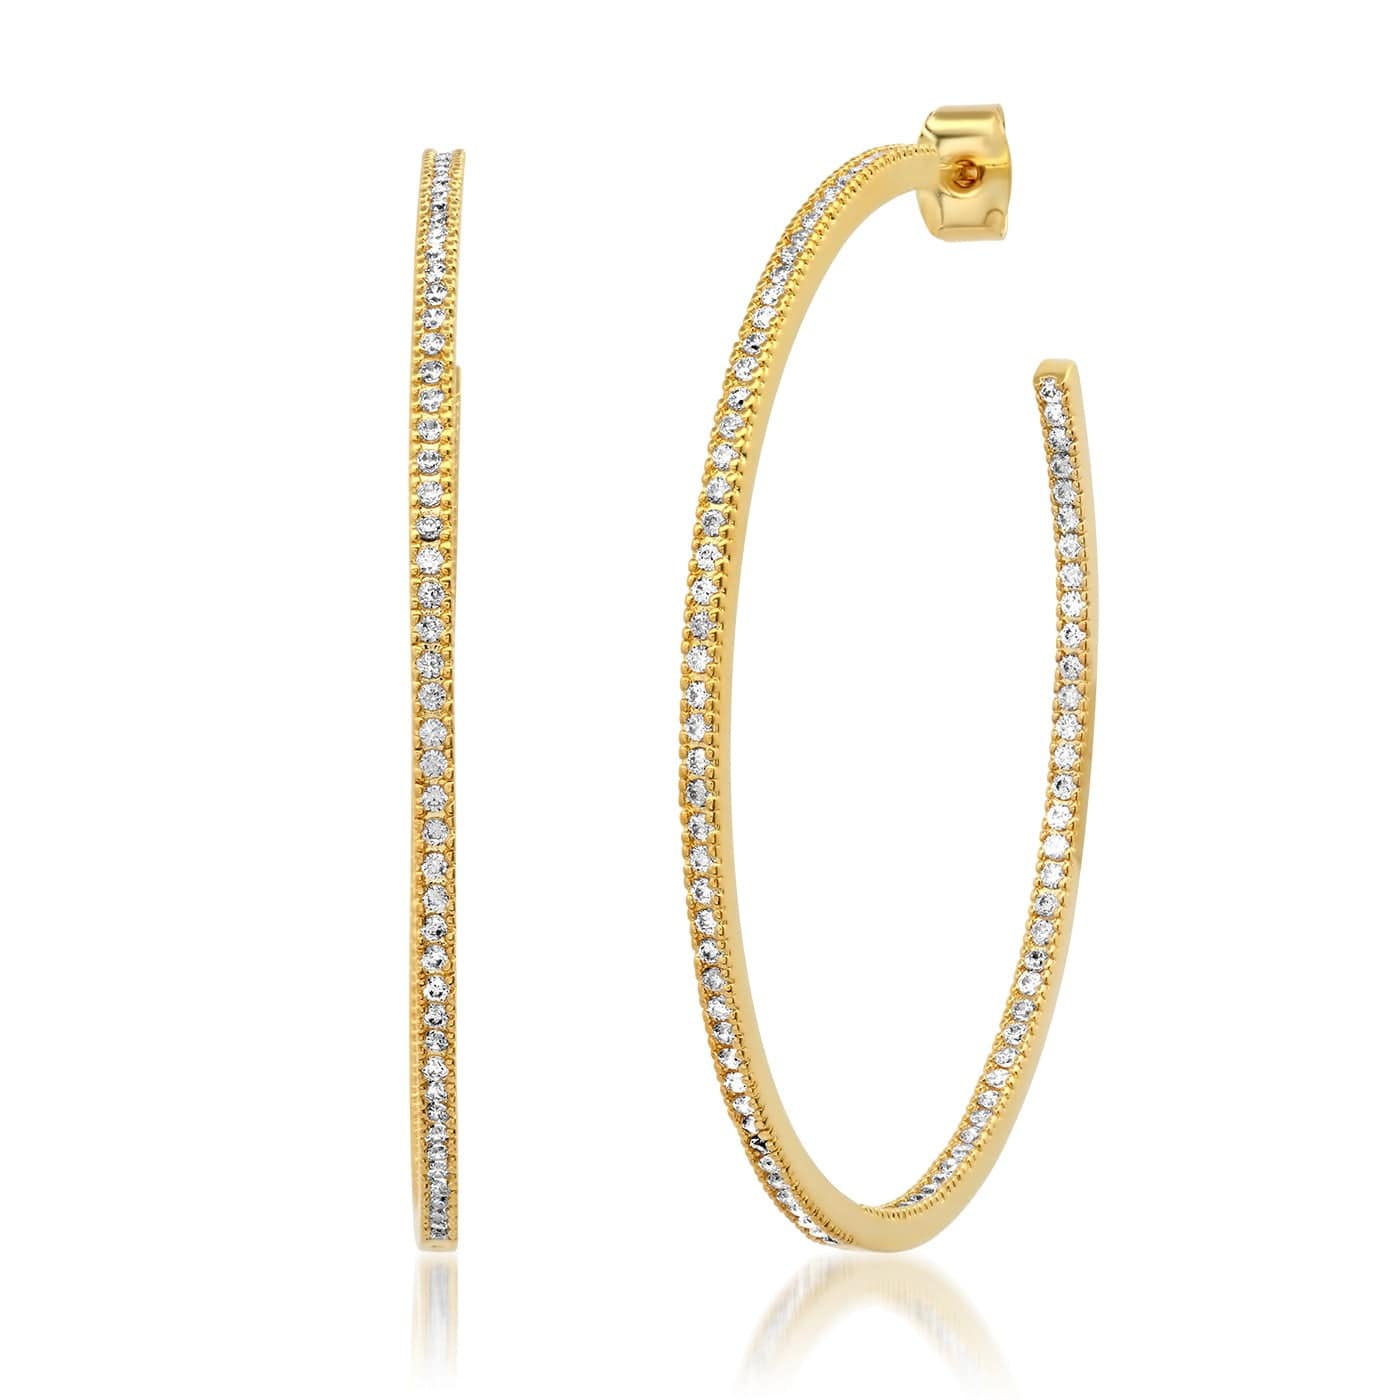 TAI JEWELRY Earrings Gold Extra Large Pave Cz Hoops